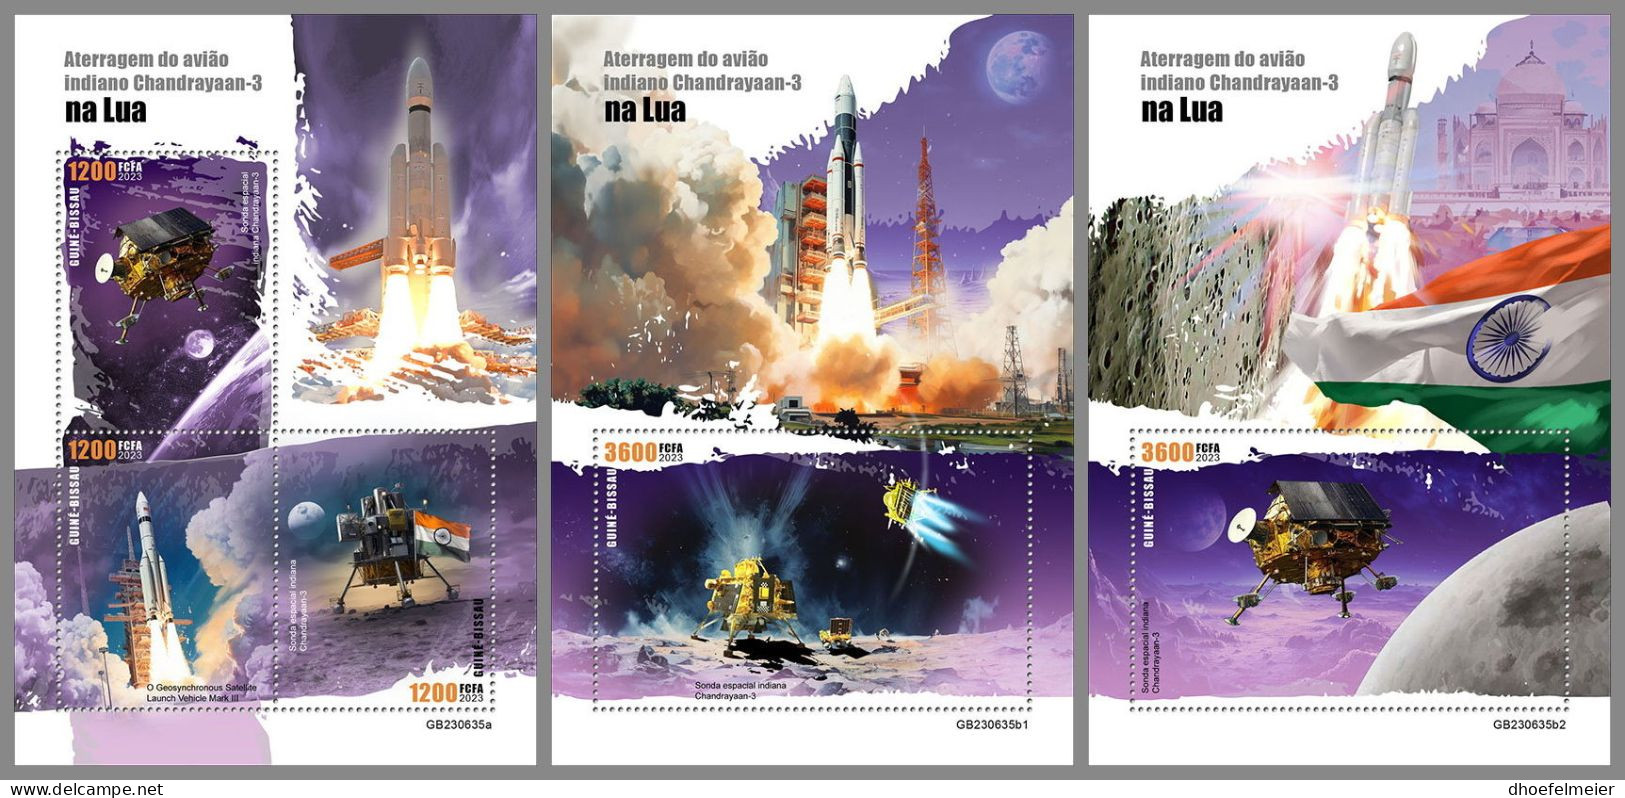 GUINEA-BISSAU 2023 MNH Indian Chandrayaan-3 Space Raumfahrt M/S+2S/S – OFFICIAL ISSUE – DHQ2420 - Afrika